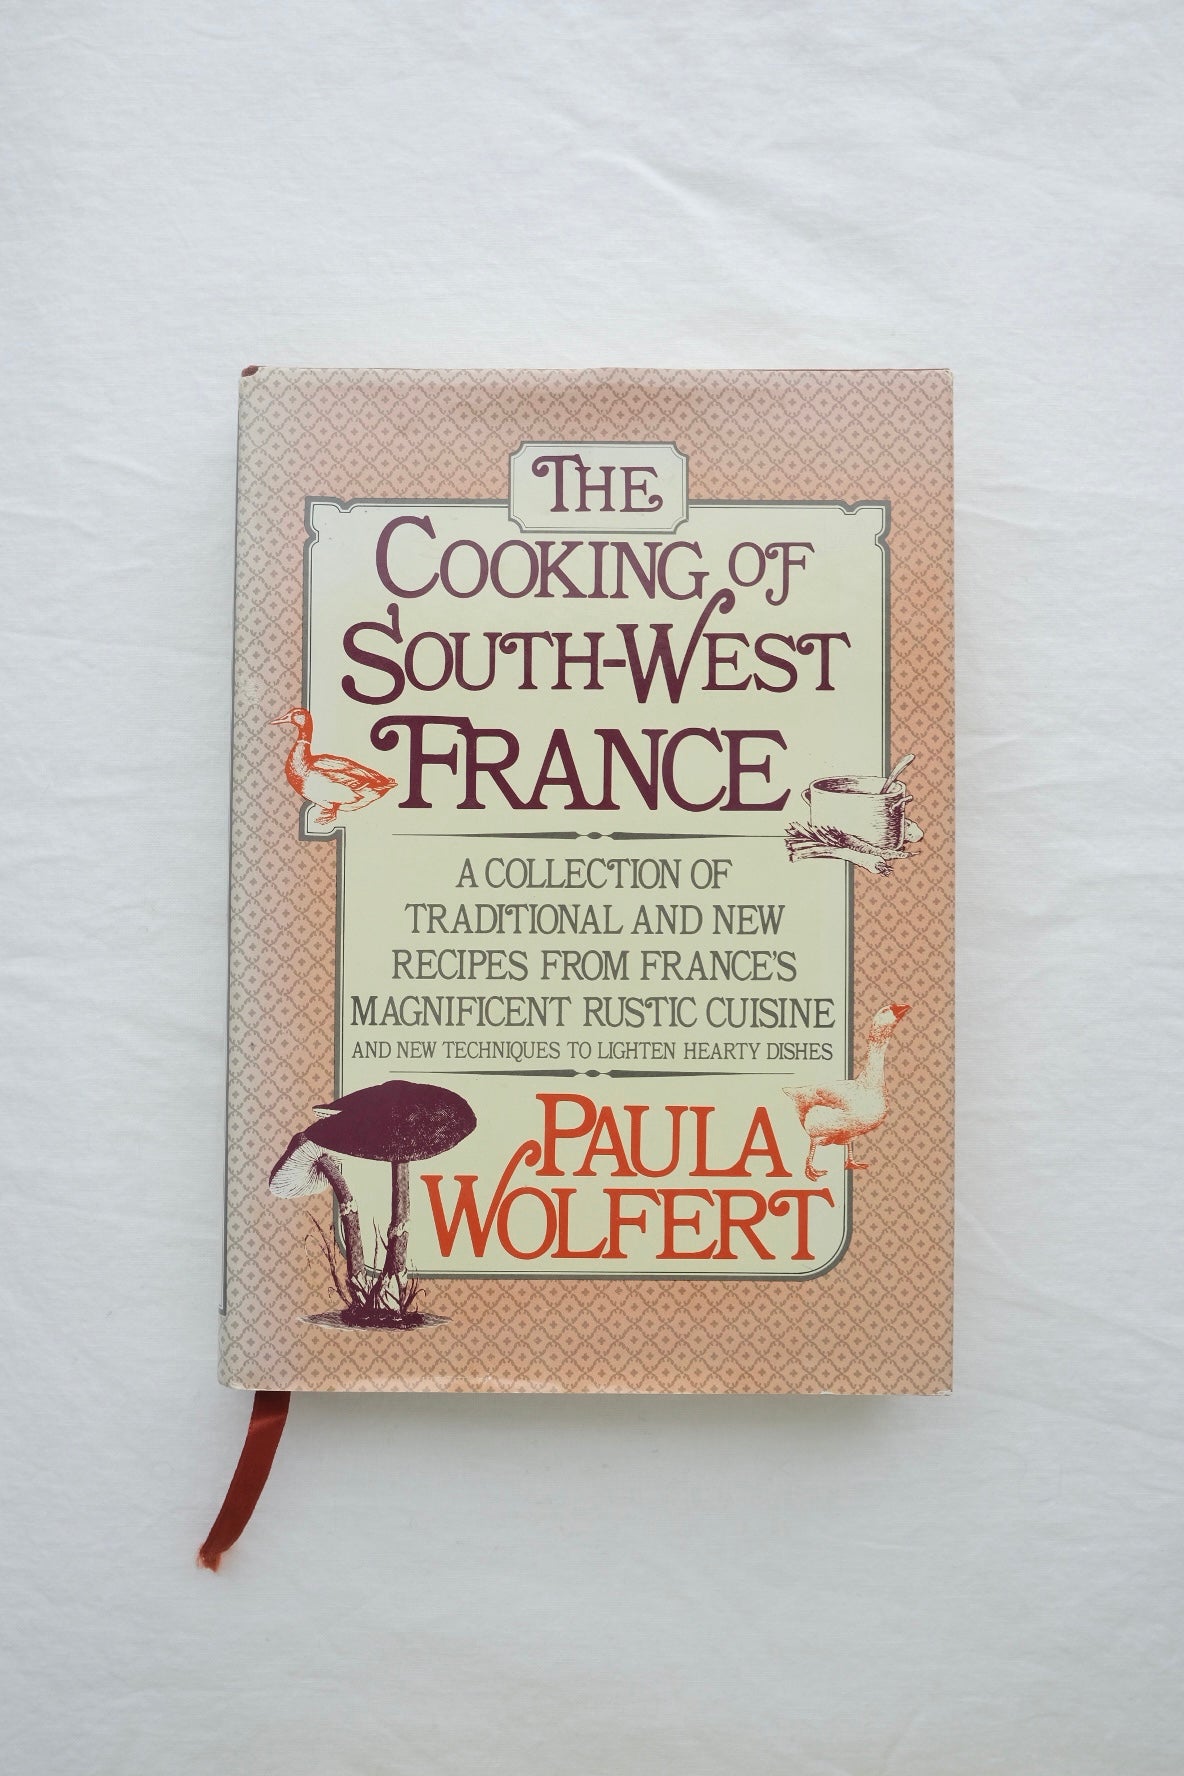 the cooking of south-west france